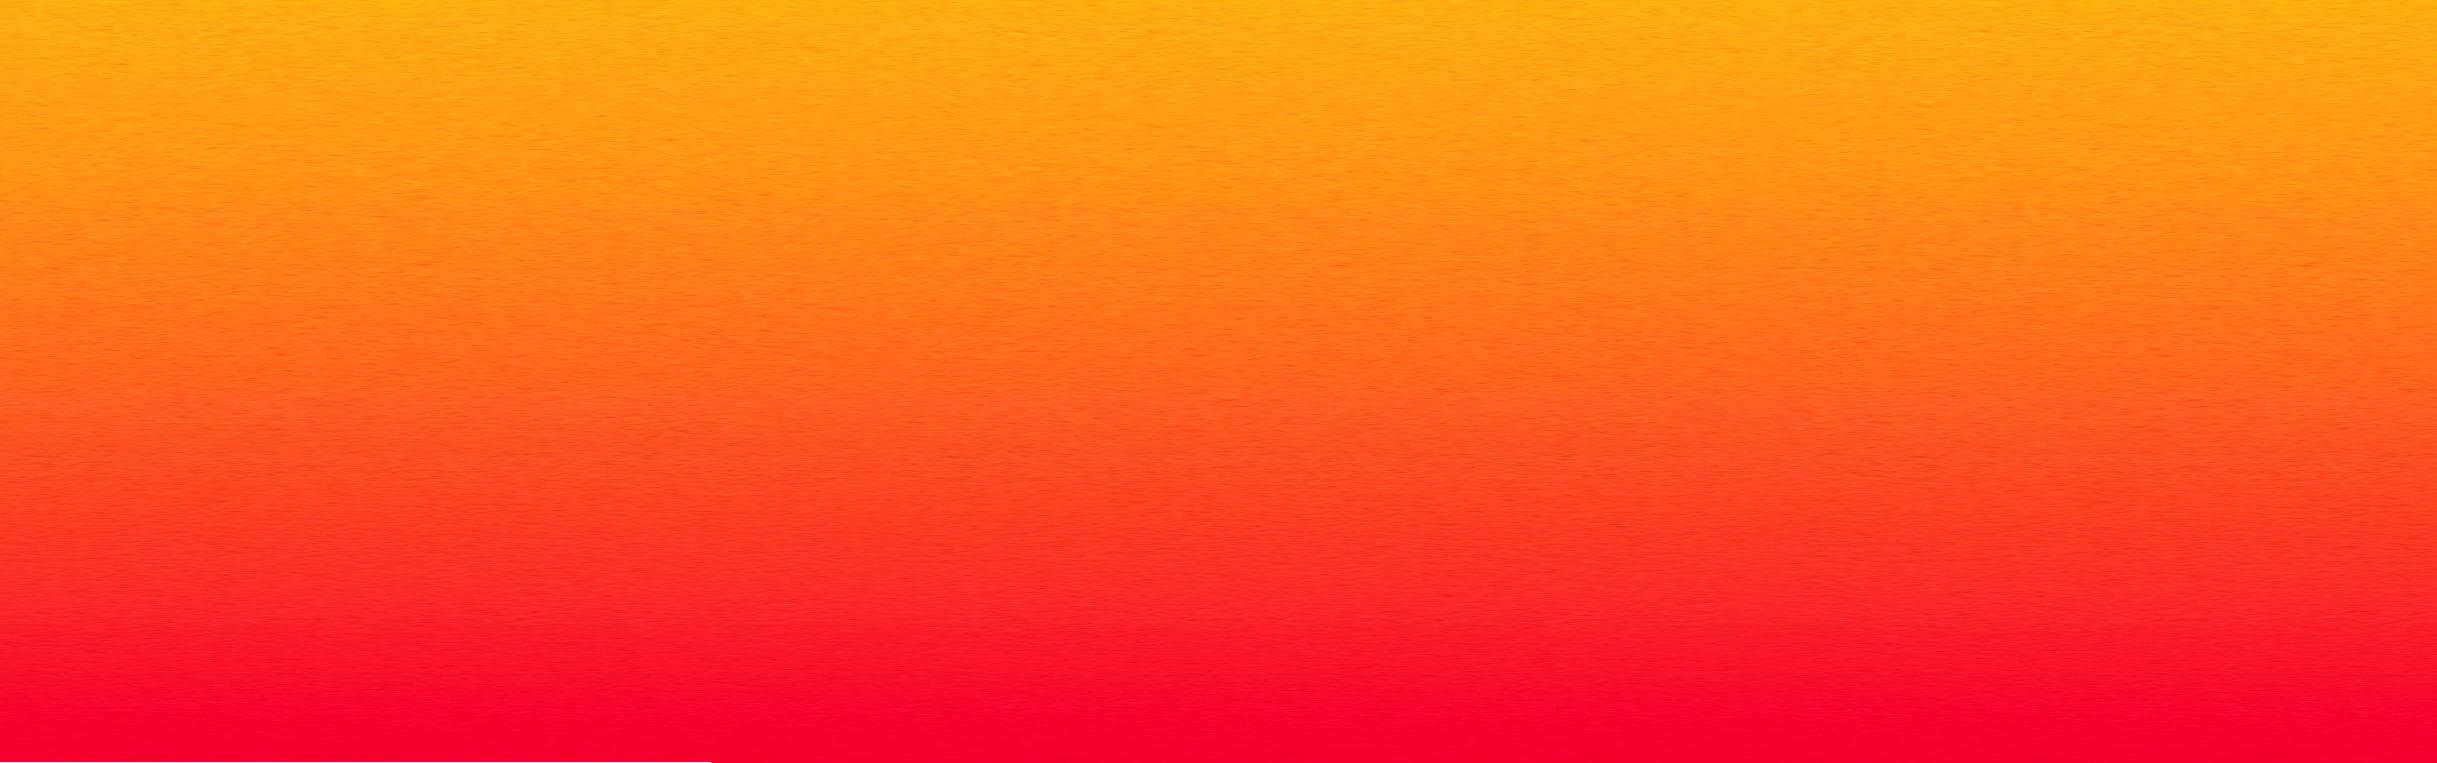 Free download Orange Dark Pink Maroon Red Wallpaper Mixed Gradient Free  Images at [2437x763] for your Desktop, Mobile & Tablet | Explore 50+ Dark  Maroon Wallpaper | Maroon Background, Maroon Colour Background, Maroon  Backgrounds